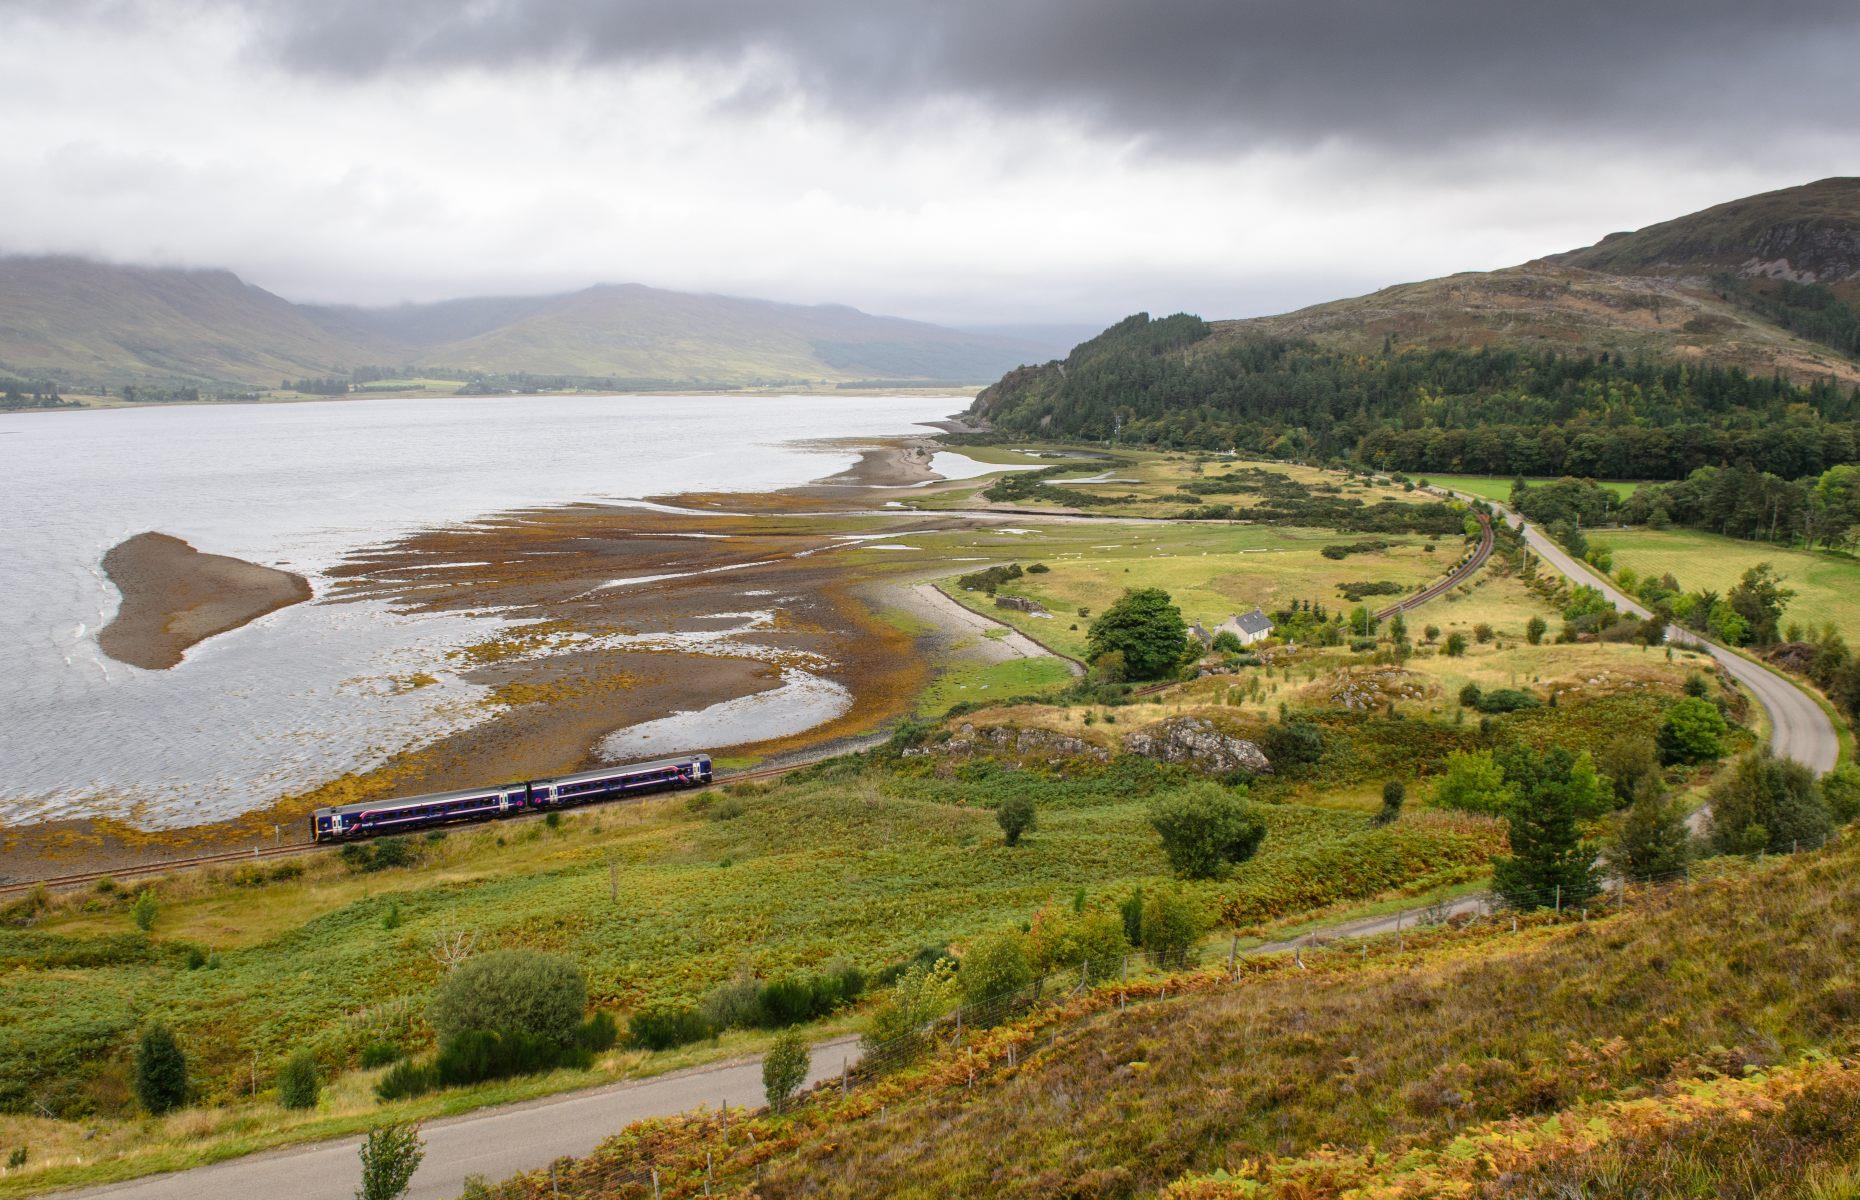 <p>Whether it’s starting from Inverness or Kyle of Lochalsh, this <a href="http://www.kylerailway.co.uk/">coast to coast rail journey</a> through the Scottish Highlands is a truly unforgettable experience. Spanning 80 miles (129km) from Scotland’s east coast to the west, the Kyle Line travels from jagged peaks and dense forests to picturesque hillsides and glittering lochs. The spectacular journey takes around two hours and 40 minutes featuring gorgeous views of Skye, stunning Highland scenery and the pretty shores of Loch Alsh. </p>  <p><a href="https://www.loveexploring.com/gallerylist/111452/the-uks-most-beautiful-views-ranked"><strong>Discover the UK’s most beautiful views ranked</strong></a></p>